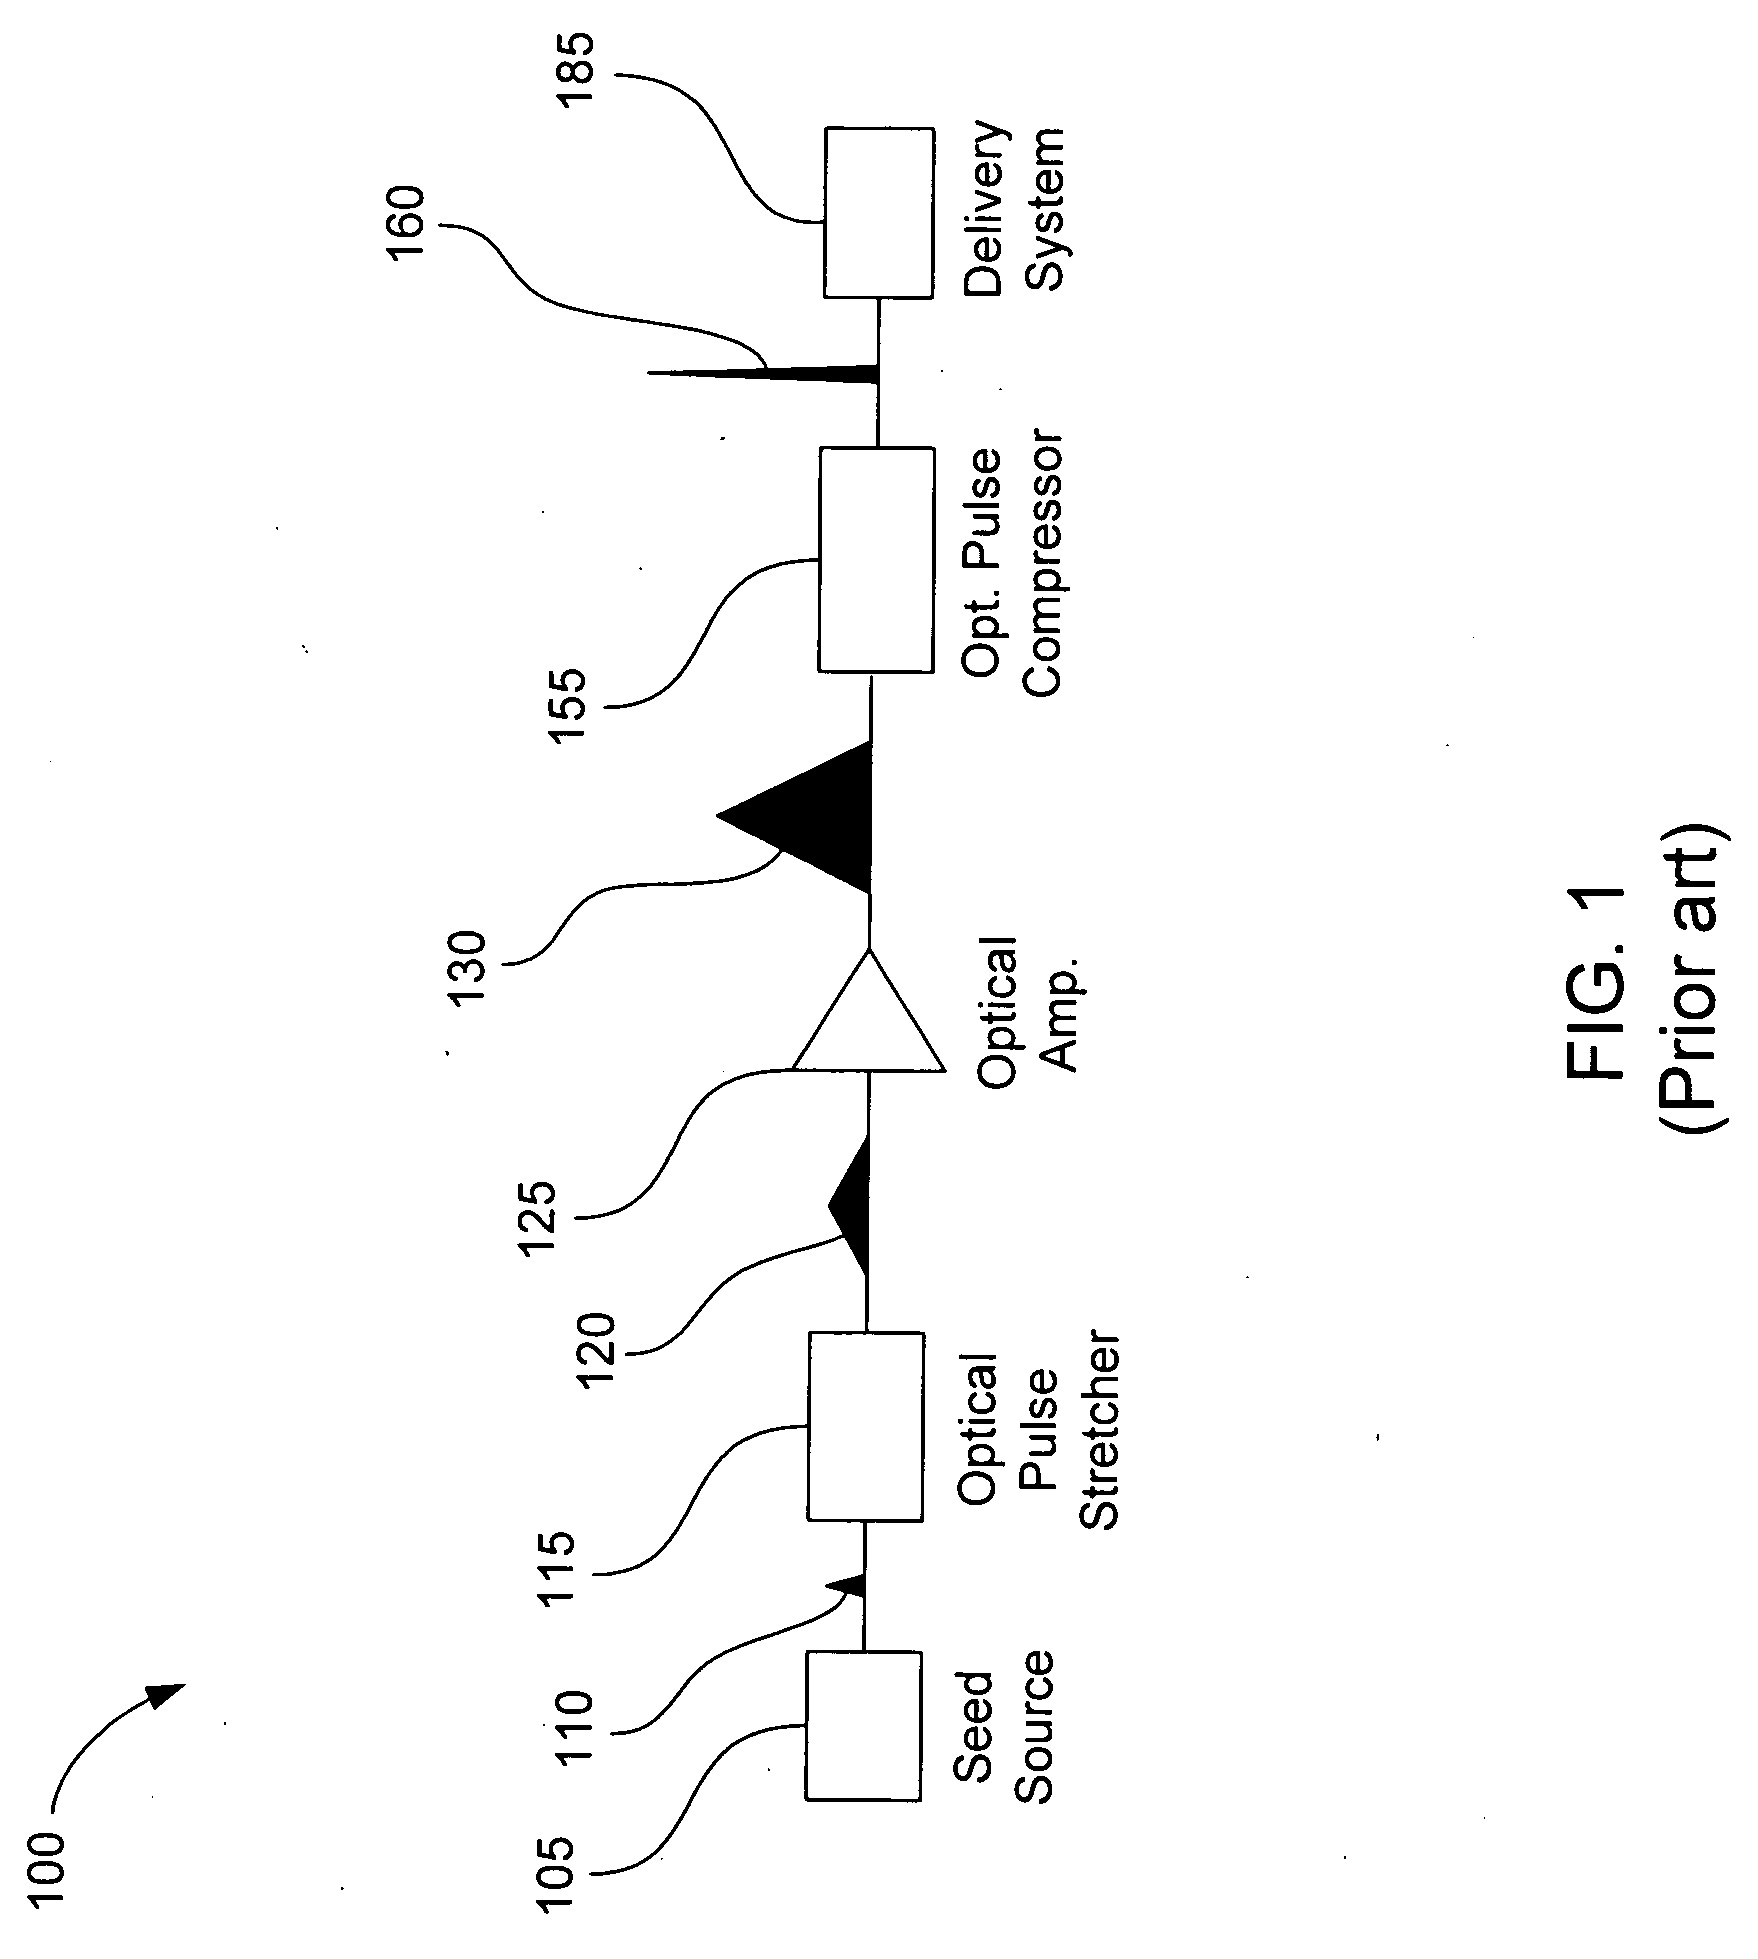 High average power ultra-short pulsed laser based on an optical amplification system